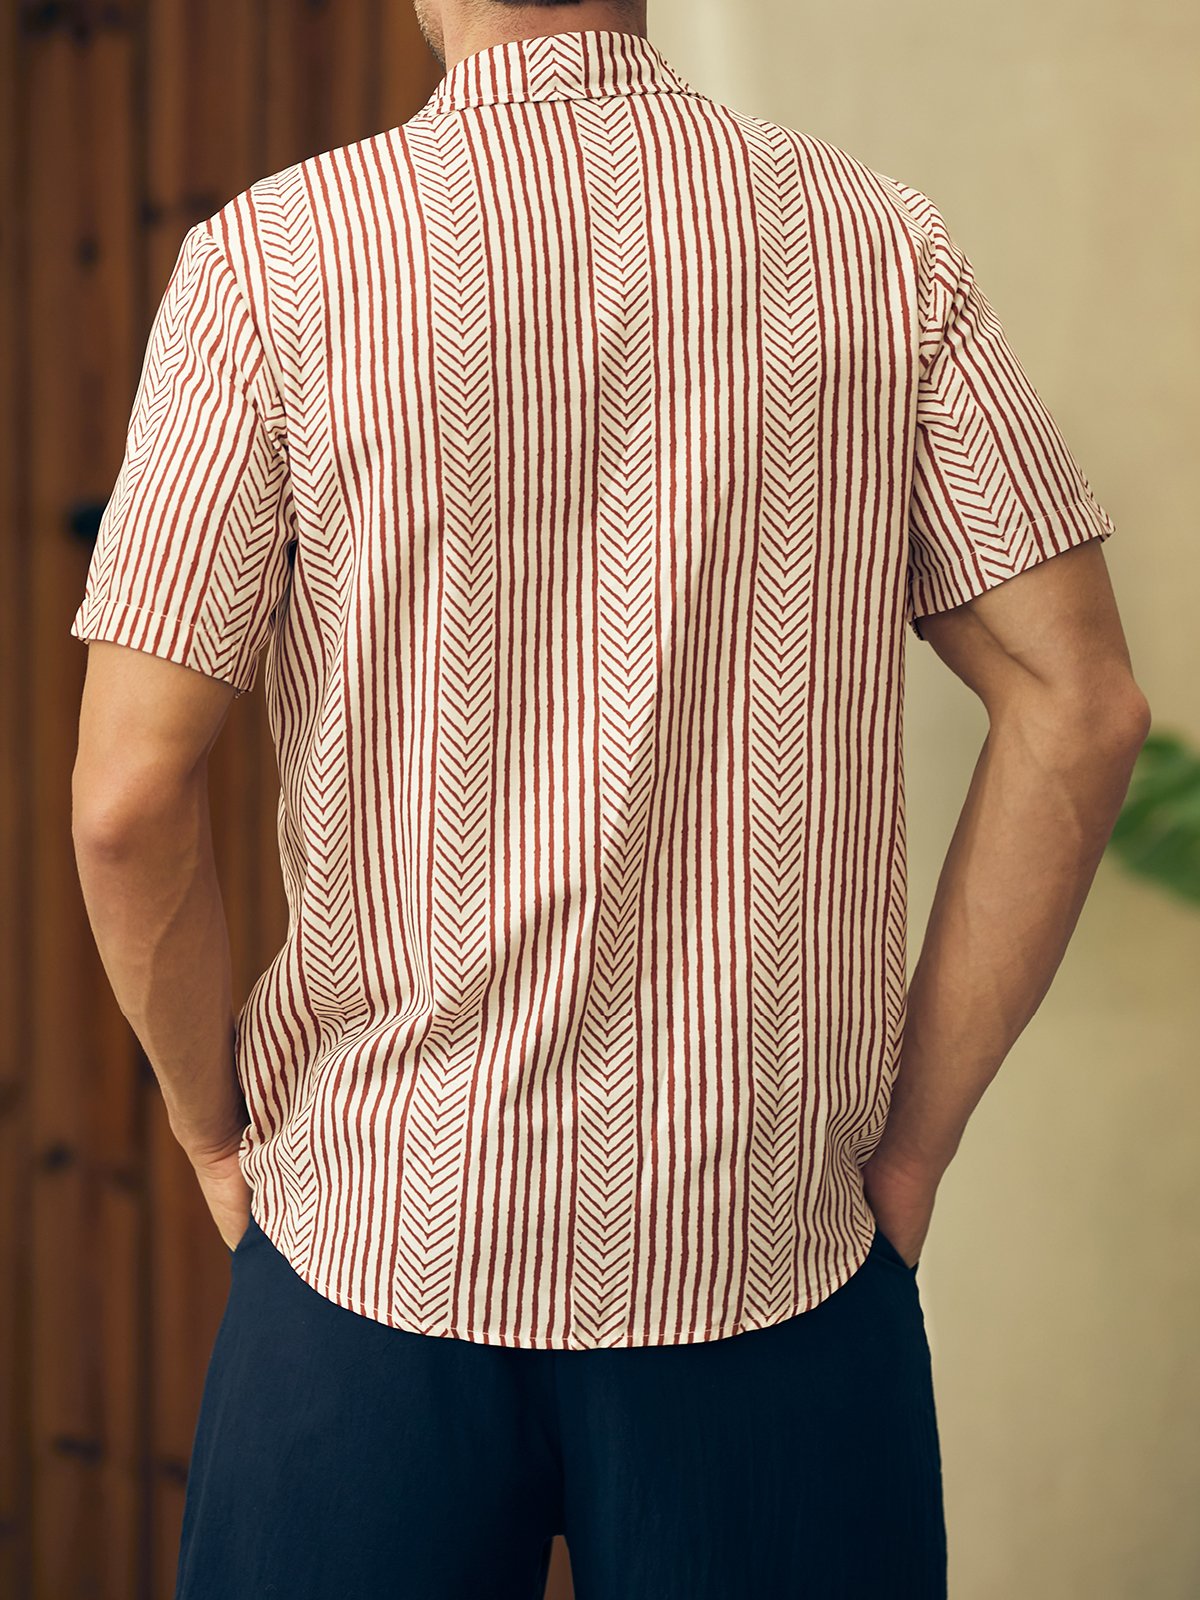 Hardaddy Shirts For Father Retro Striped Chest Pocket Short Sleeve Shirt